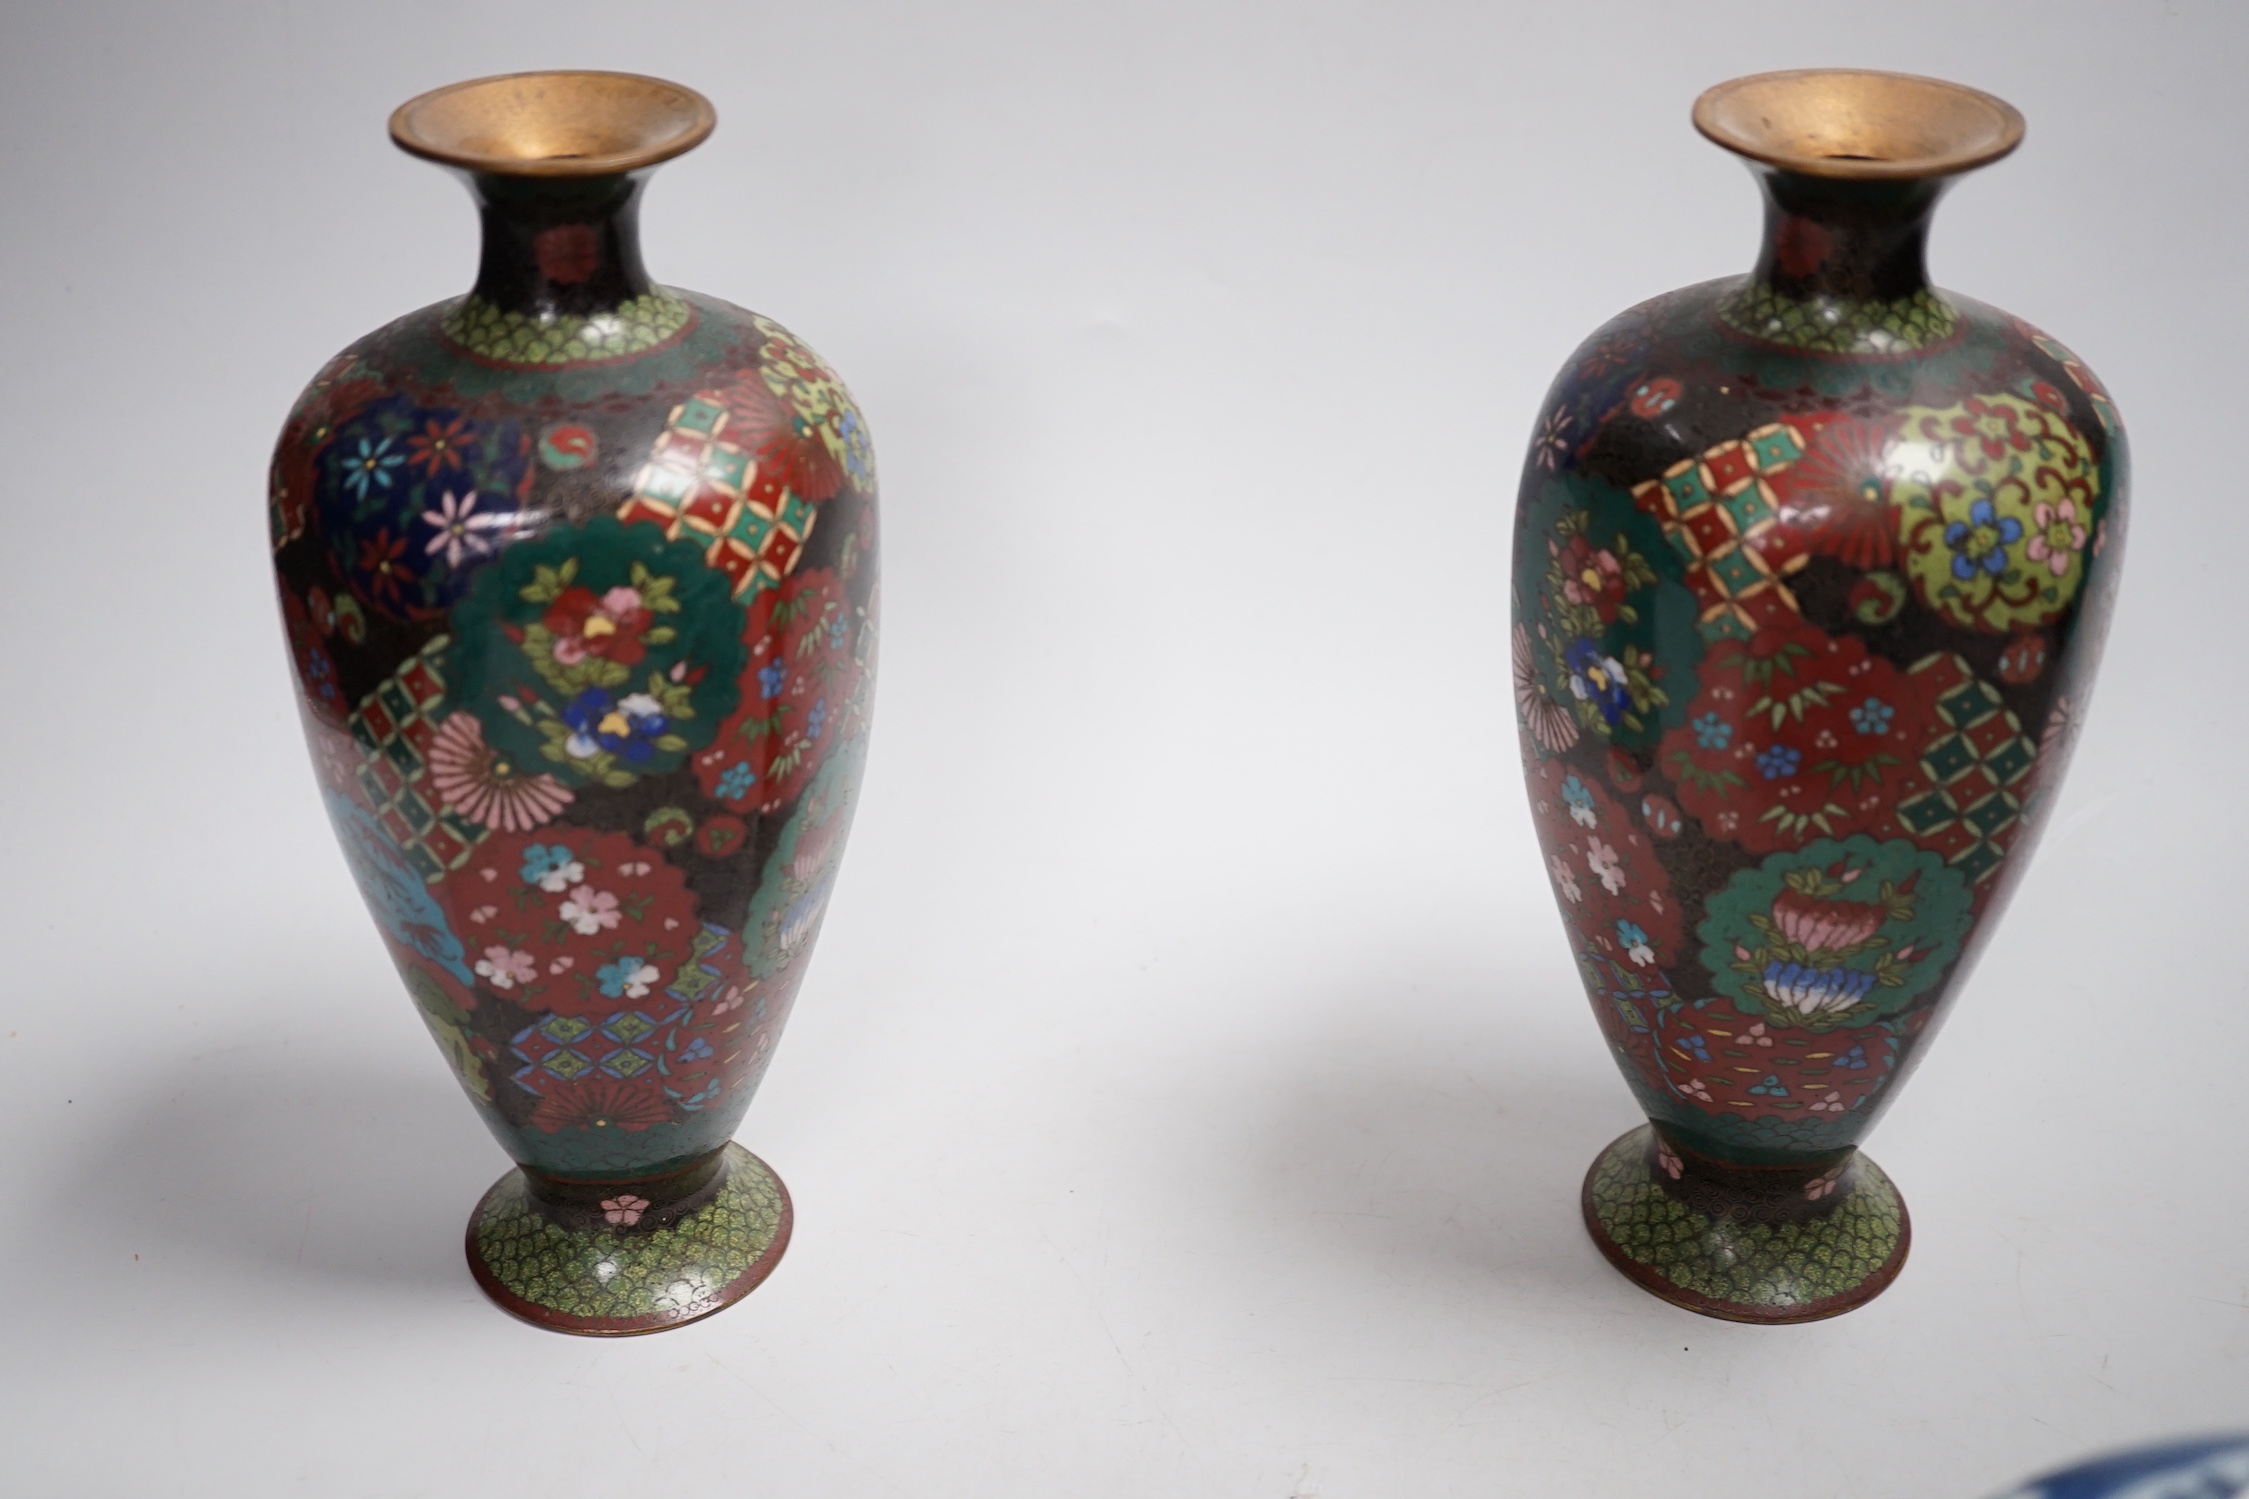 A pair of Chinese blue and white jars and associated covers and a pair of Japanese cloisonné enamel vases, cloisonné vases 21cm high